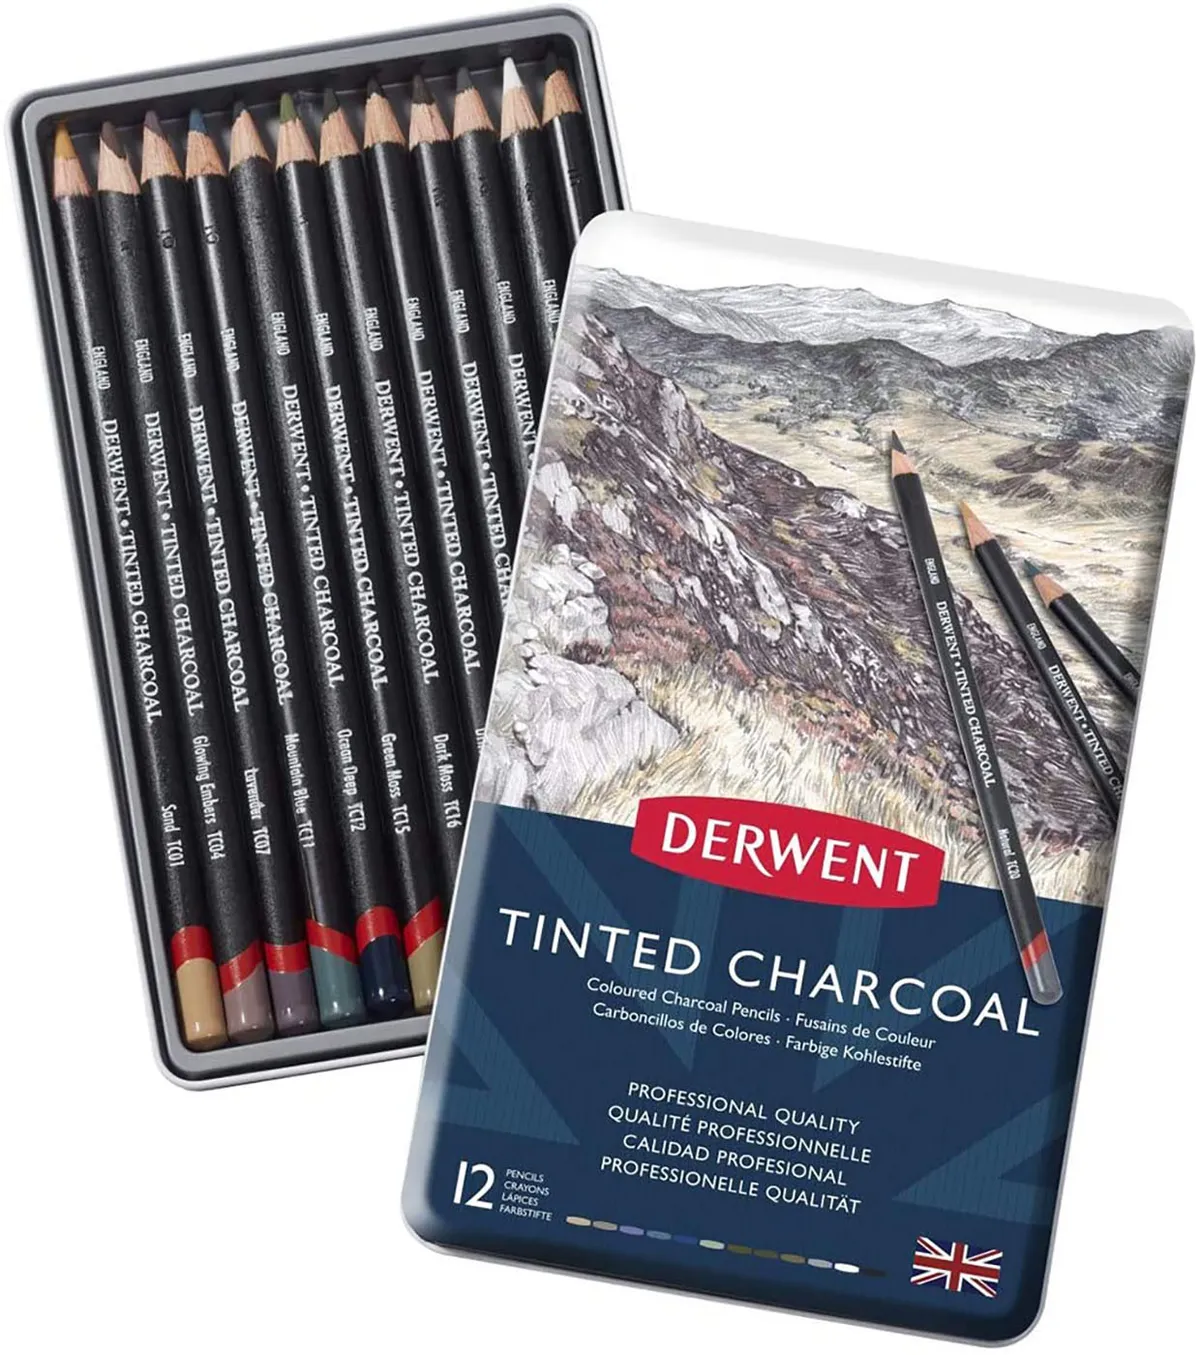 Buying Charcoal Sticks and Pencils for Drawing